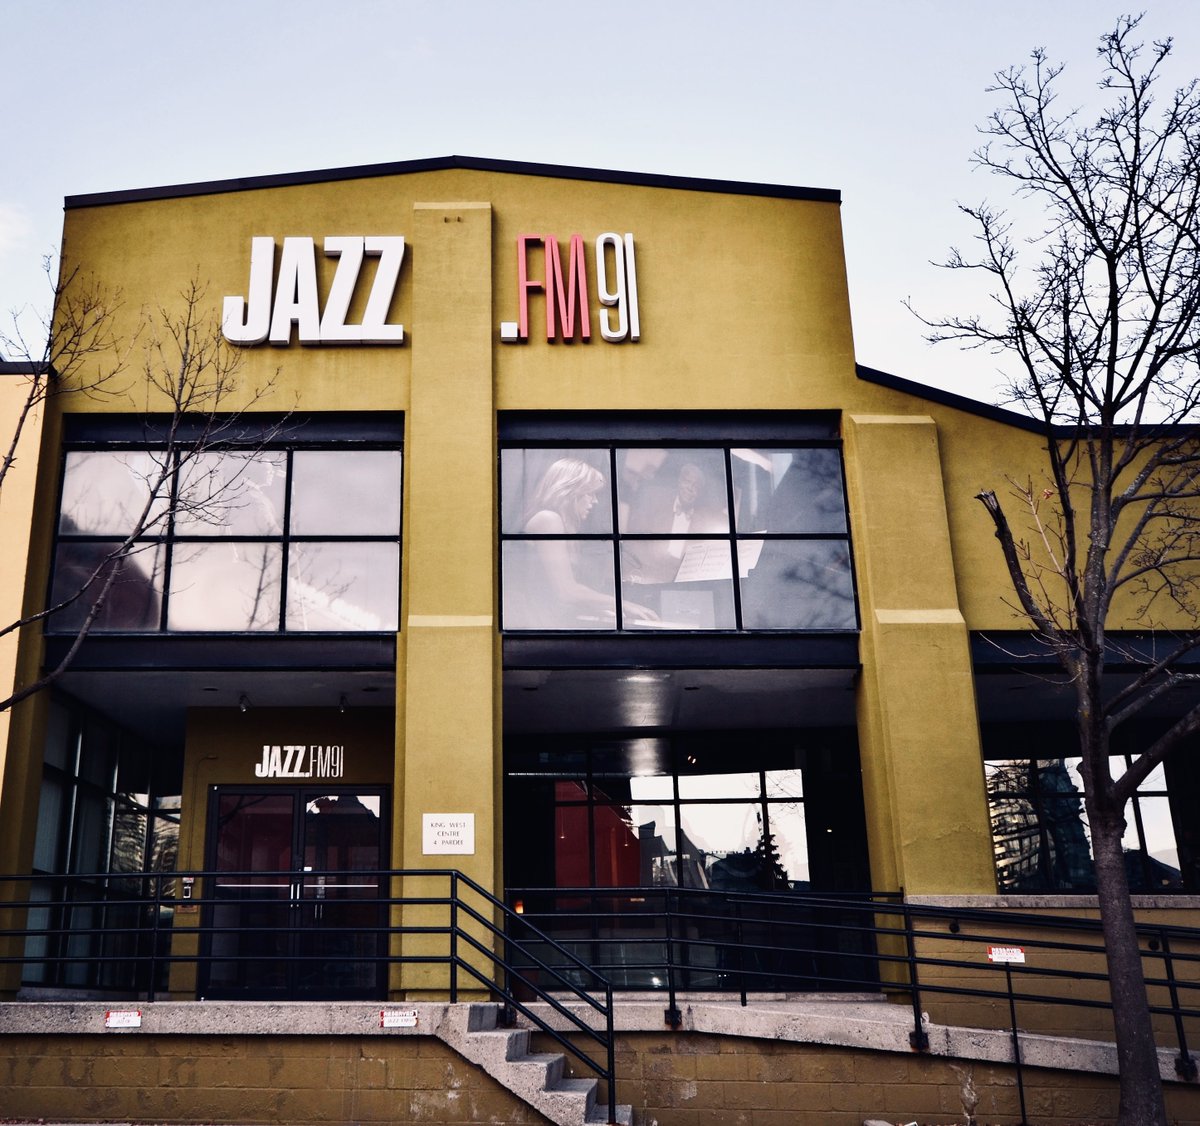 Happy Jazz Appreciation Month from Canada's jazz station @JAZZFM91 ! Listen in, buy some music, go out and see your favourite performers live. Support Jazz. #DiscoverMusic #JazzAppreciationMonth